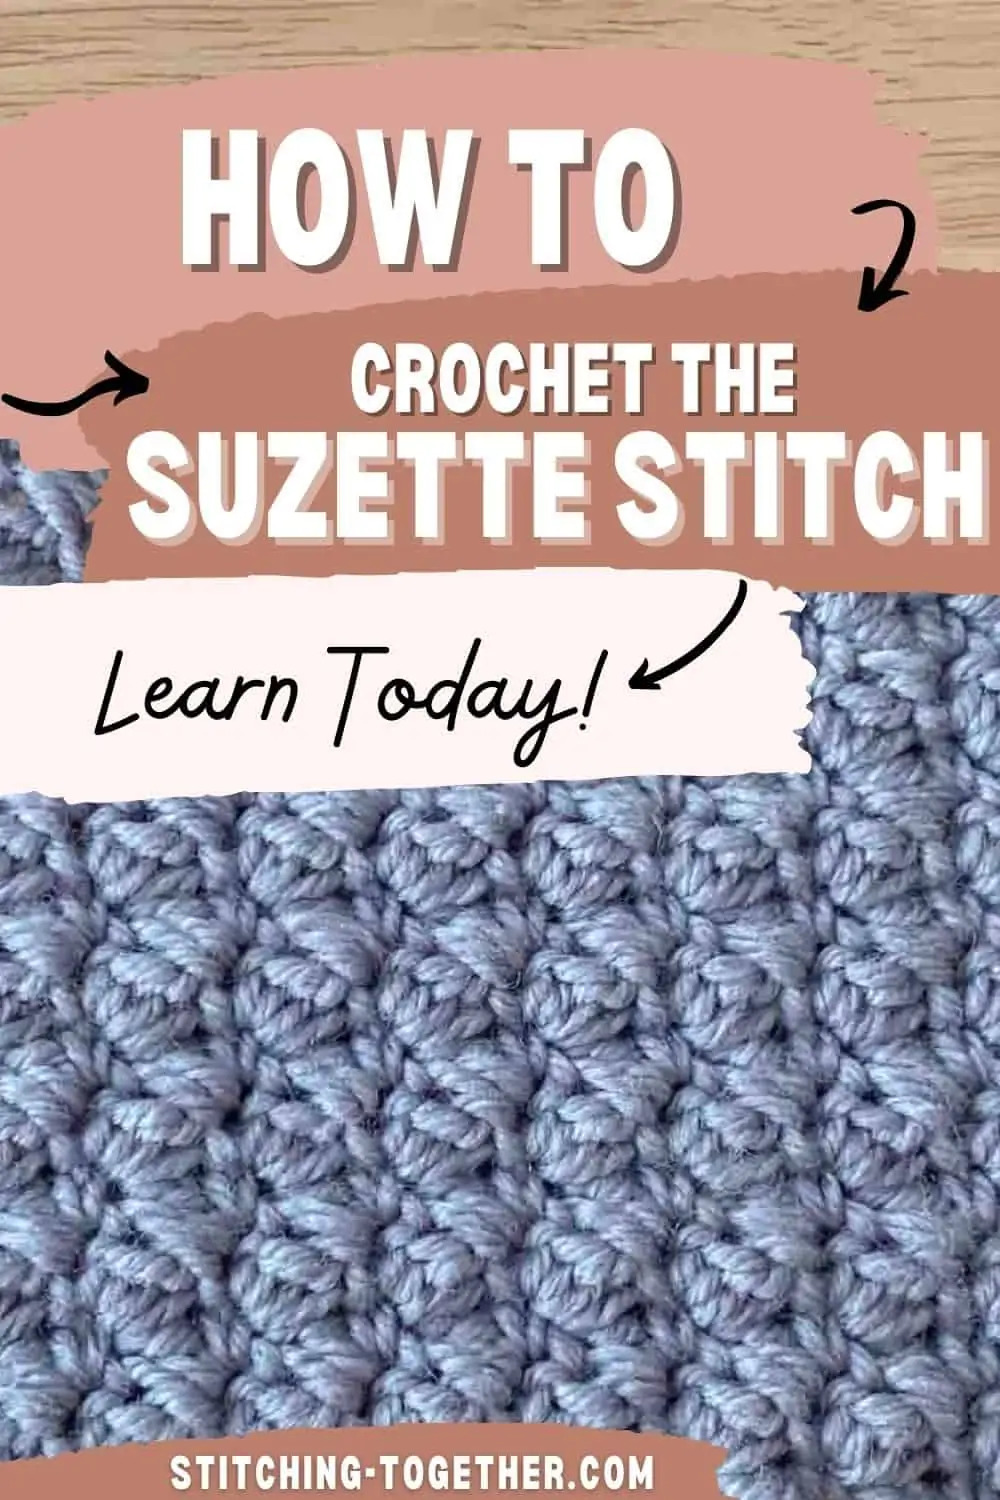 close up of suzette stitch crochet with text saying how to crochet the suzette stitch learn today!